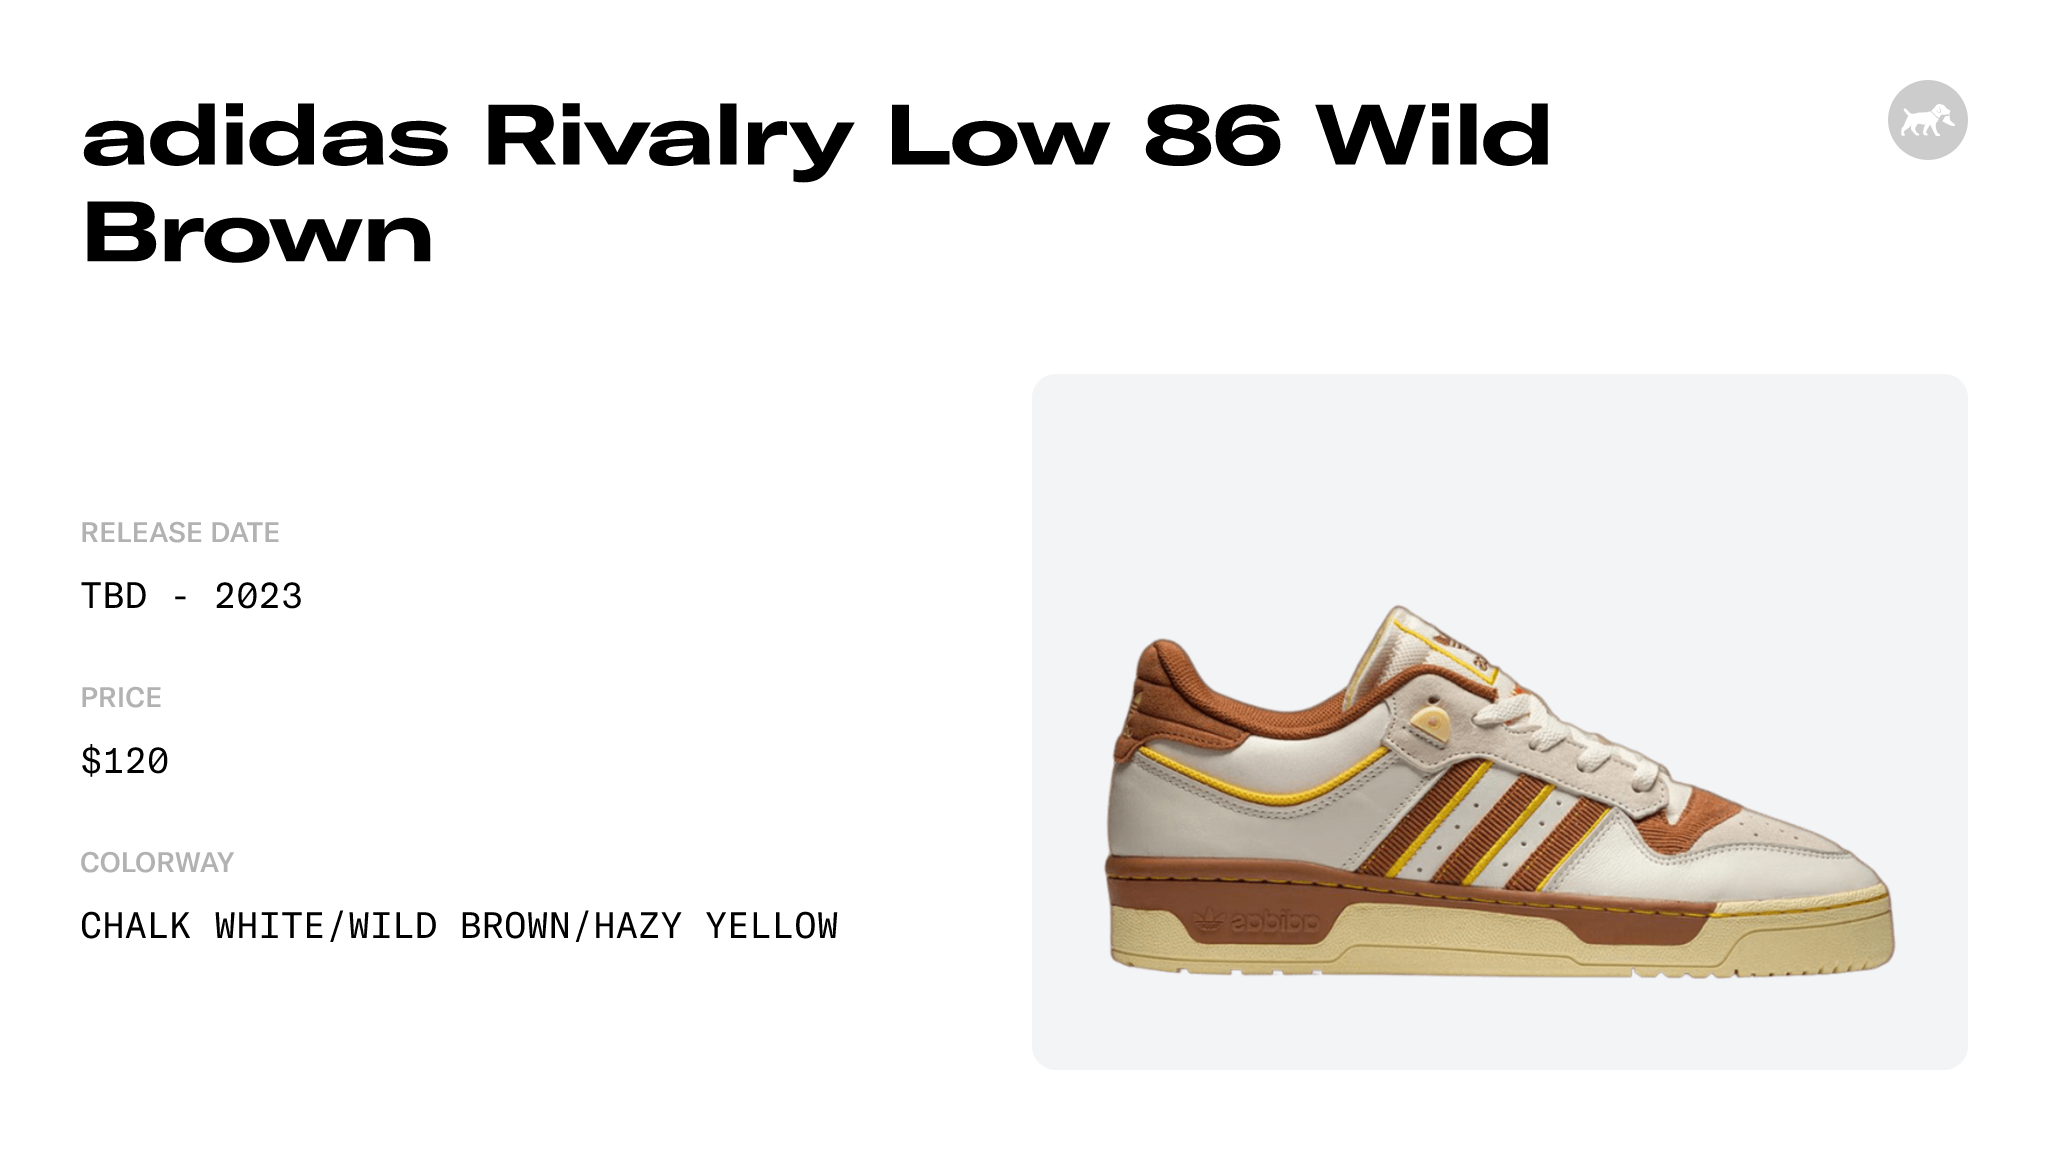 adidas Rivalry Low 86 Wild Brown - FZ6317 Raffles and Release Date